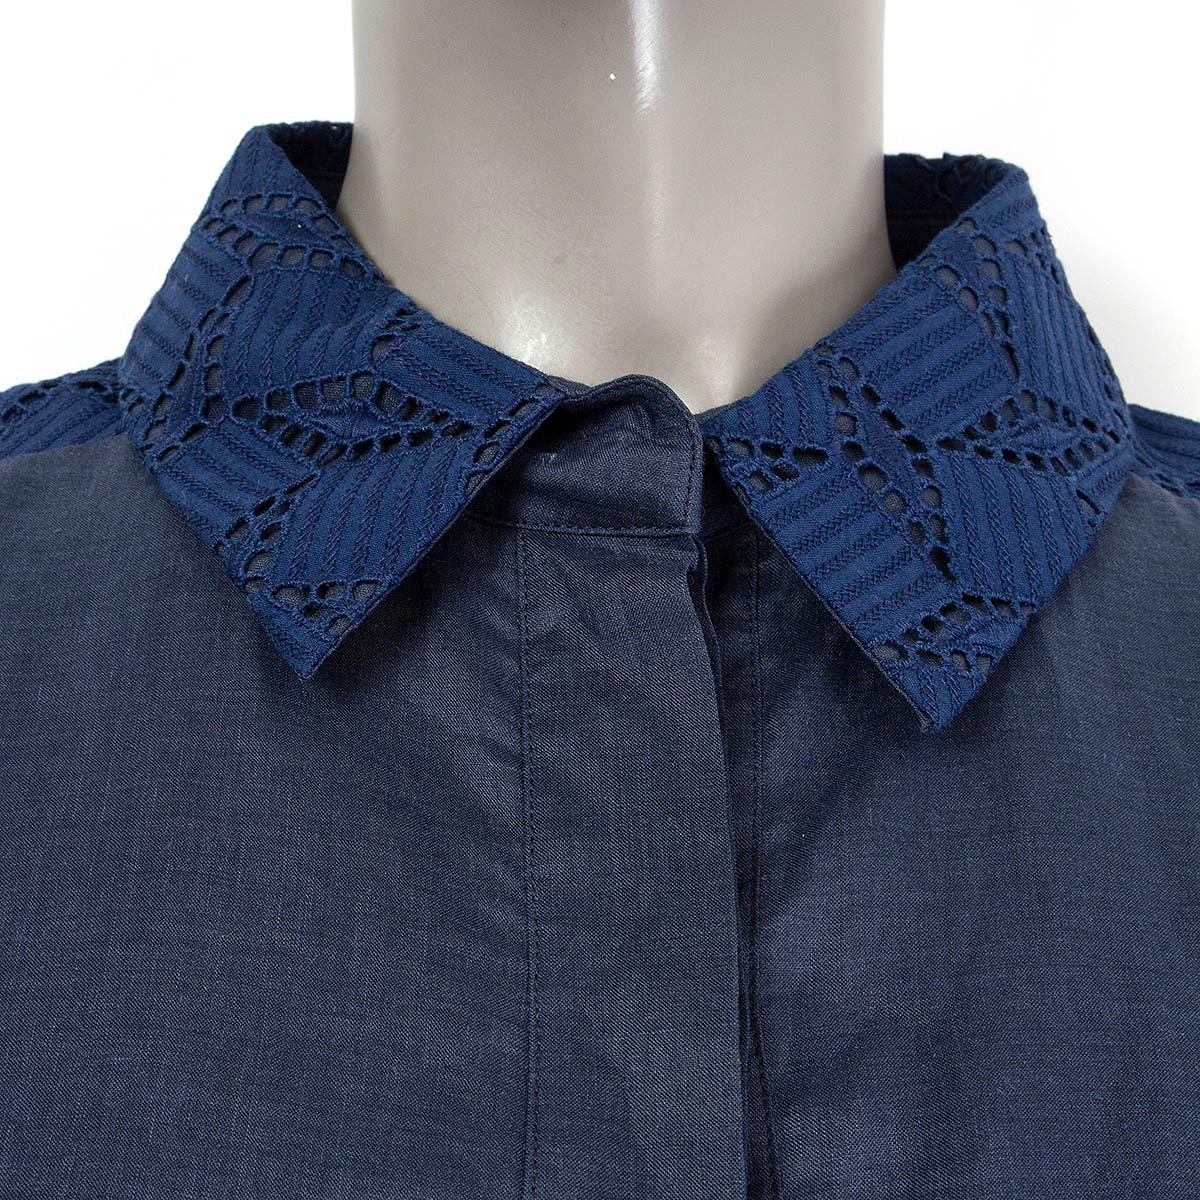 LOUIS VUITTON navy blue ramie 2013 BRODERIE ANGLAISE Button Up Shirt 38 S 1